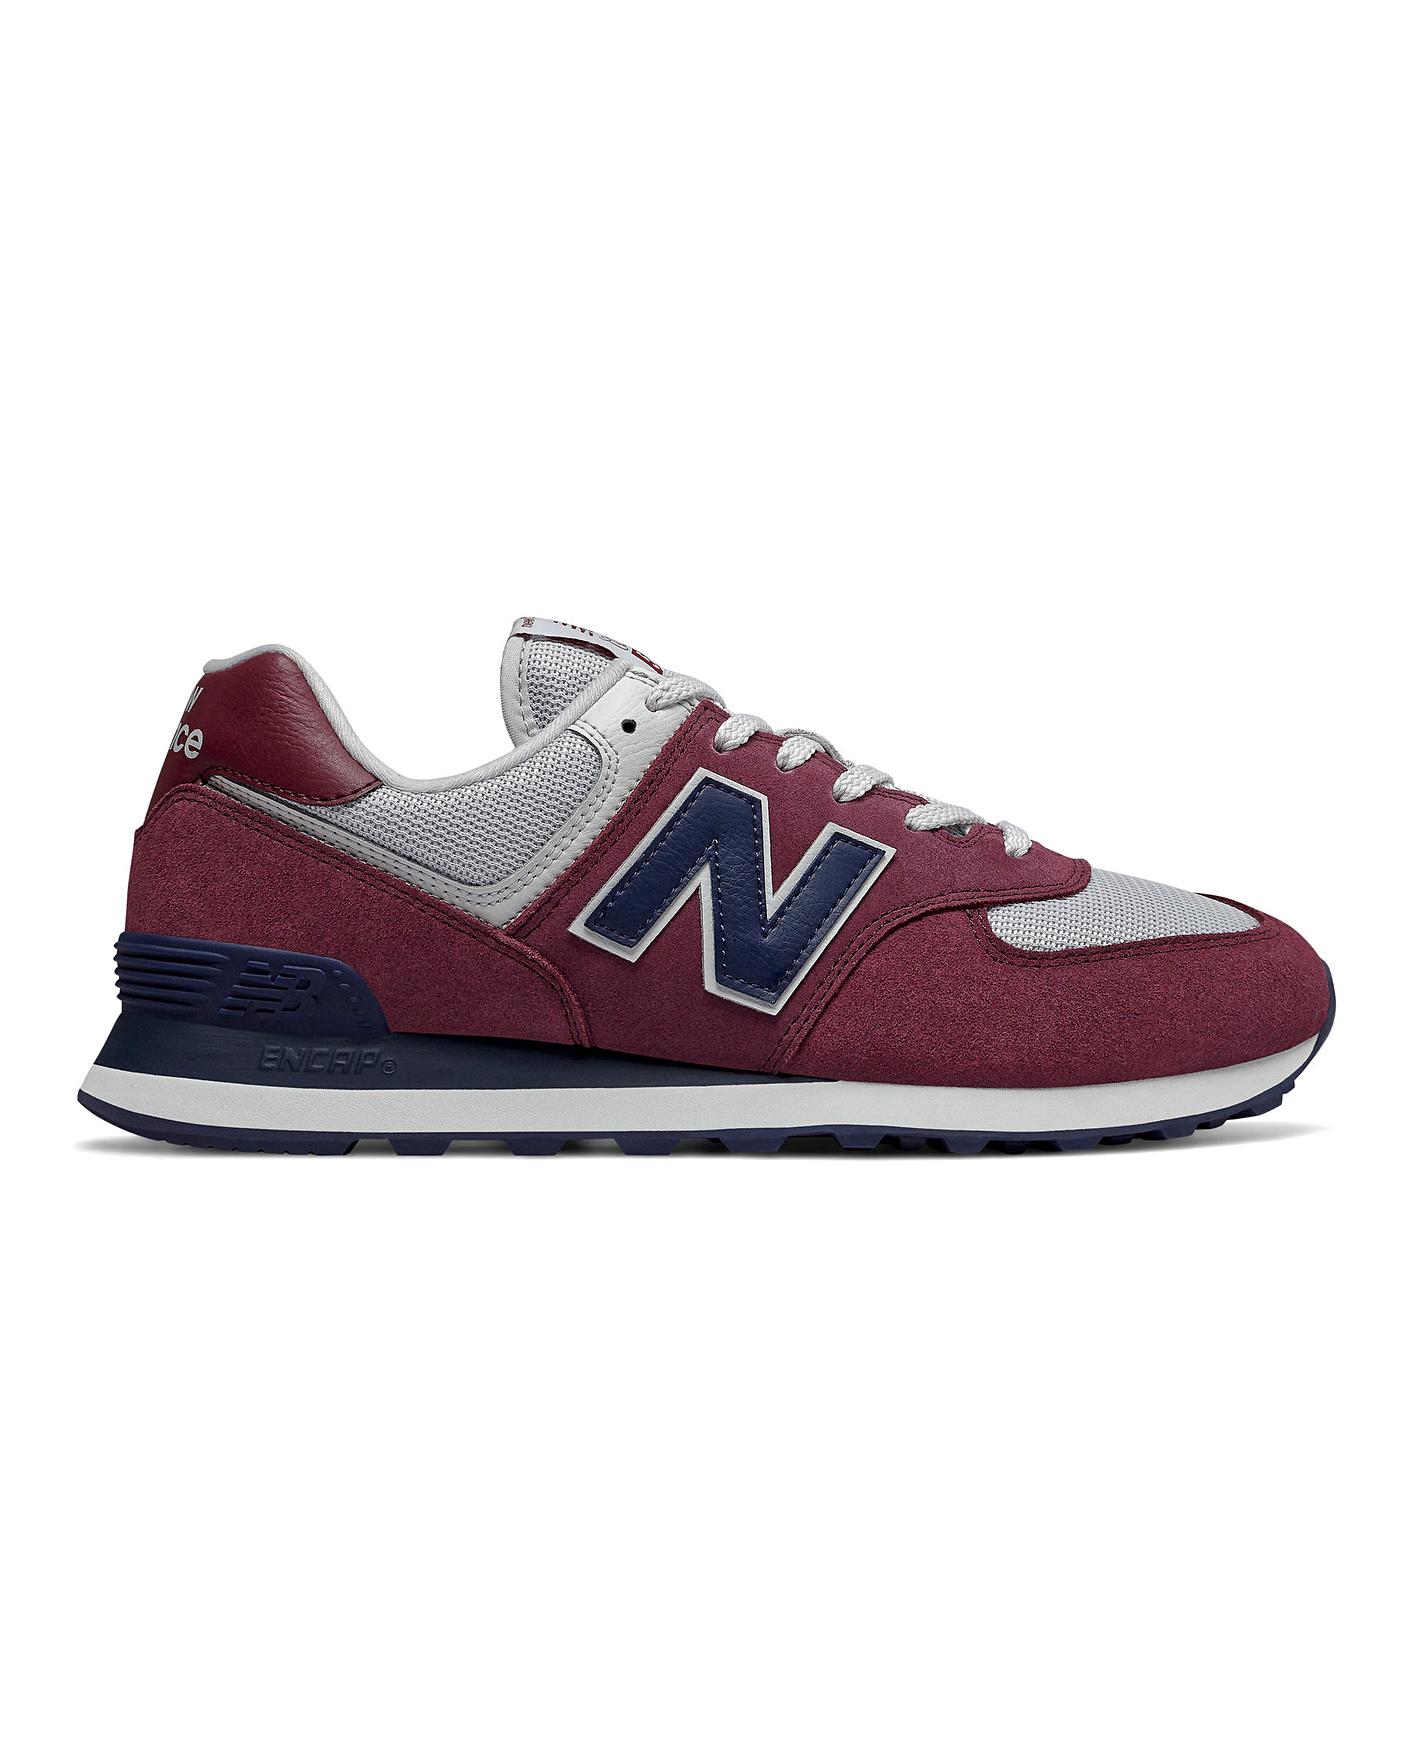 New Balance 574 Trainers | Oxendales